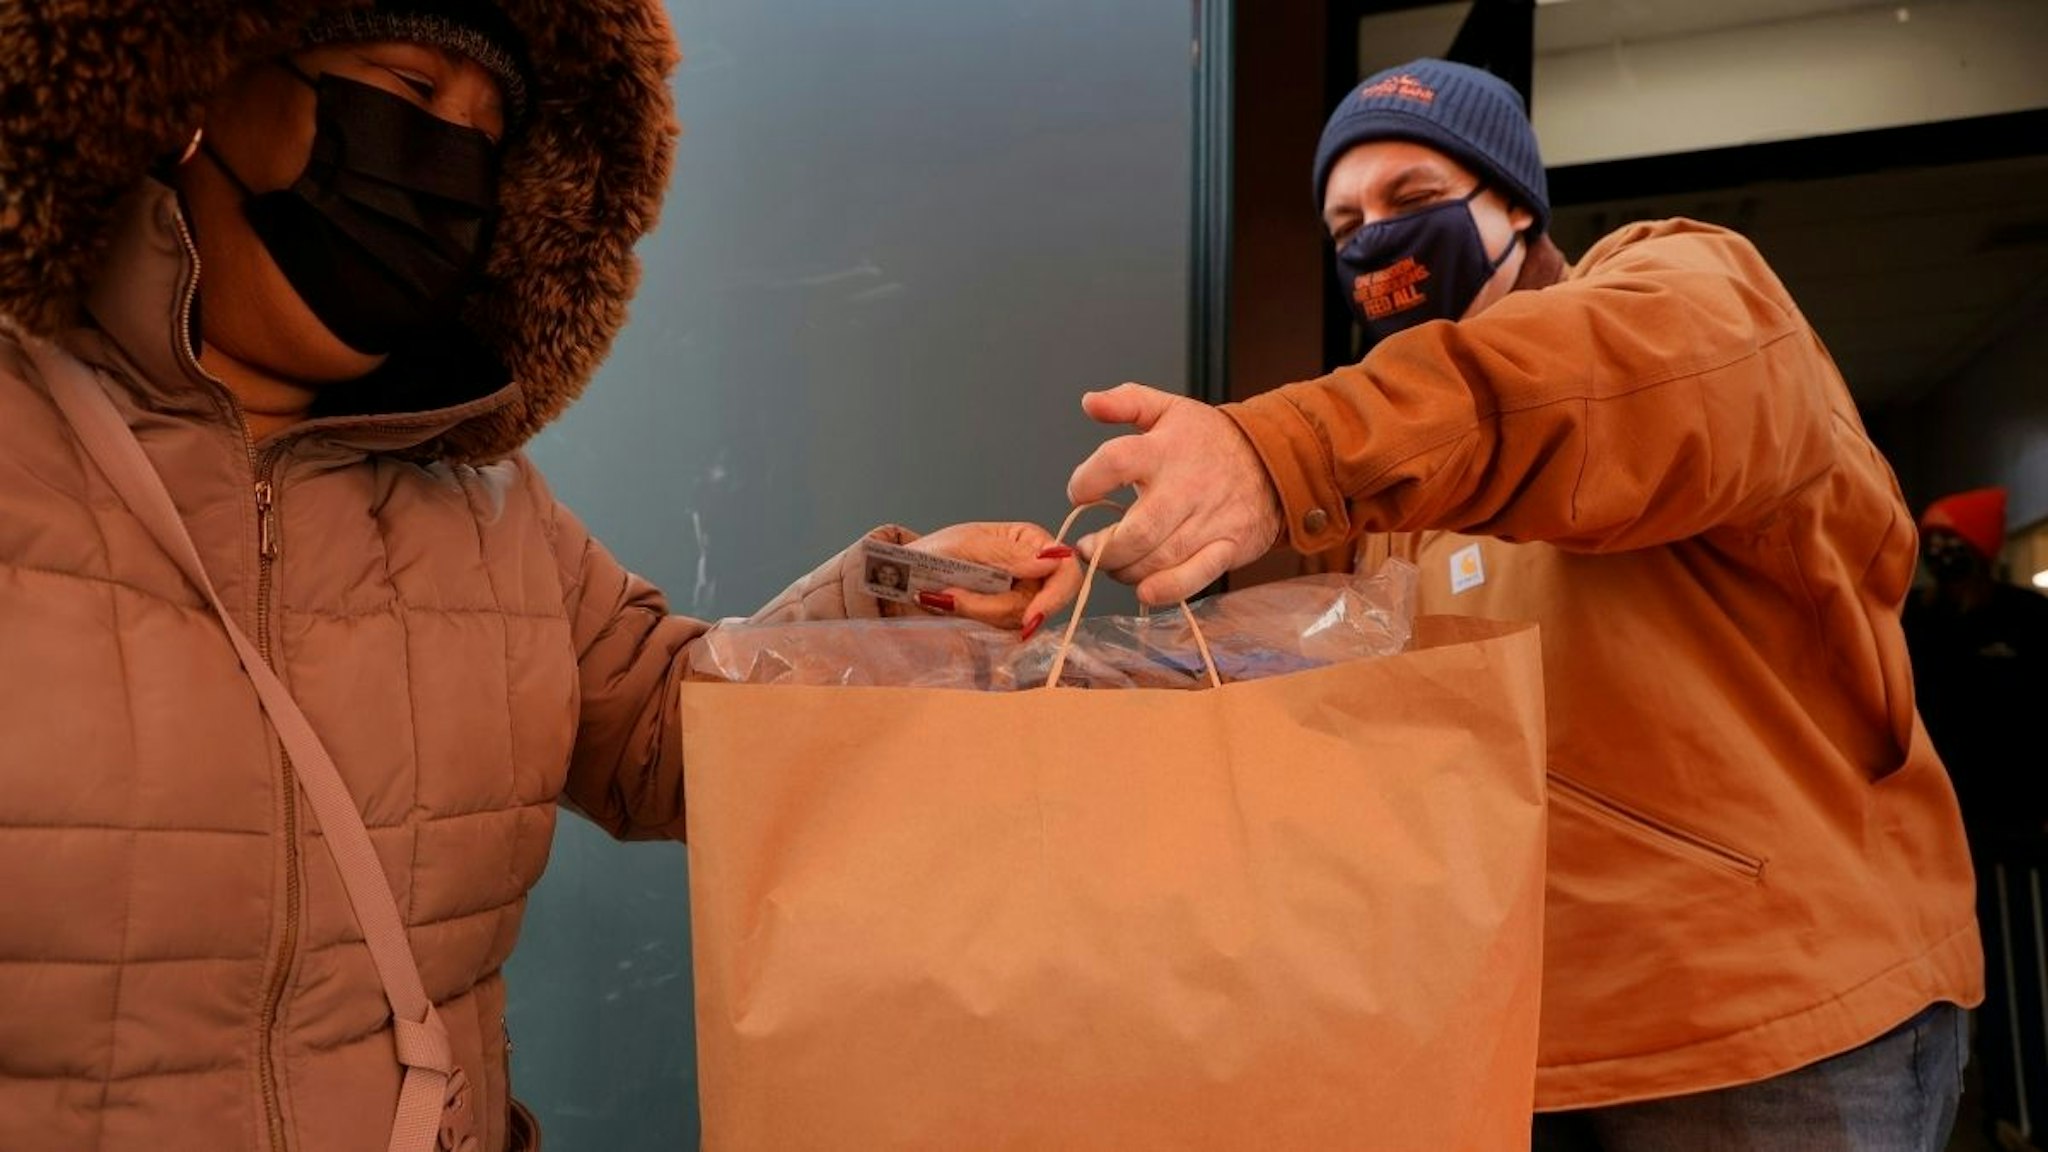 Food Bank For New York City teams up with One Warm Coat to hand out winter coats in Harlem at the Food Bank For New York City Community Kitchen and Pantry on December 10, 2021 in New York City.